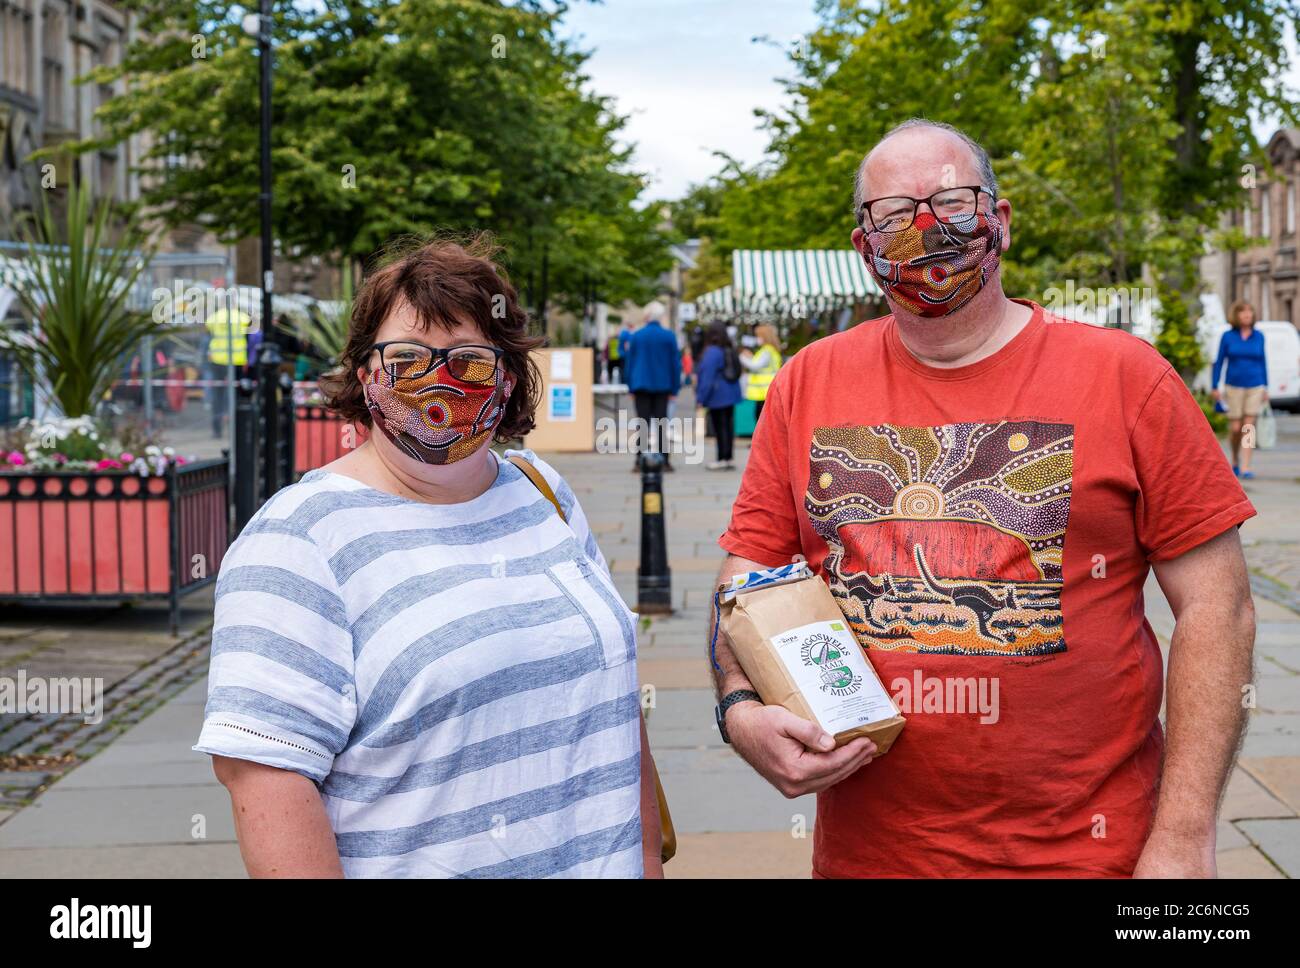 Haddington, East Lothian, Scotland, United Kingdom, 11th July 2020. Farmers Market restarts in Phase 3: the popular monthly outdoor market is held for the first time since lockdown with locals keen to support local food producers. Despite not being mandatory outdoors, most people are  wearing face masks. Laura and Matt have made their own colourful matching face masks and bought a packet of Mungoswells locally milled flour Stock Photo